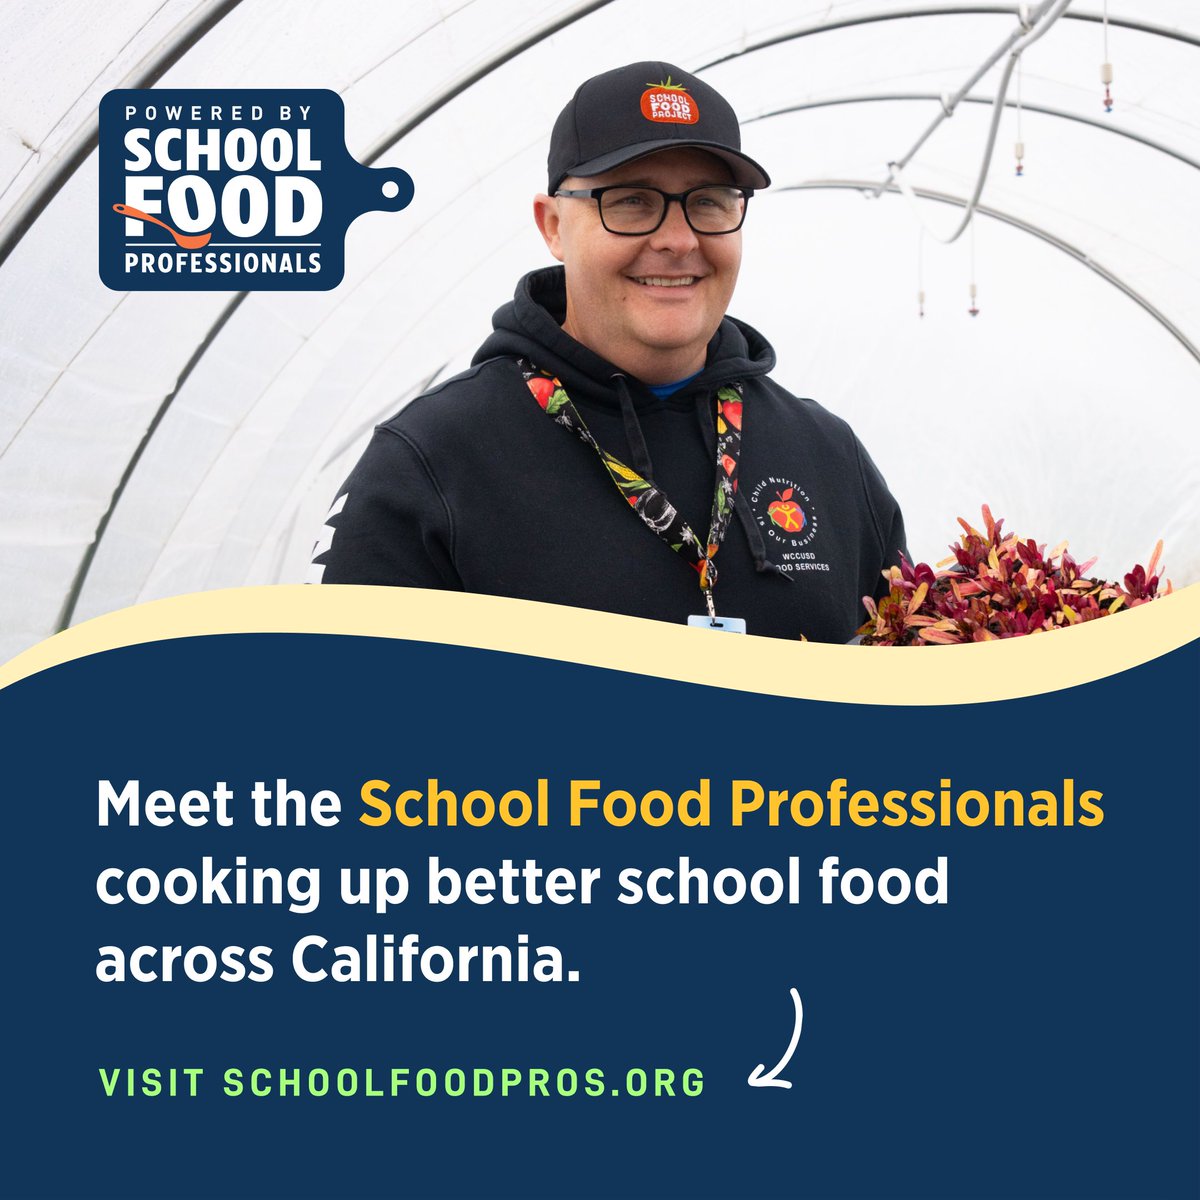 Over the next year, the Powered by School Food Professionals campaign will uplift the stories of the School Food Professionals at the center of the school food change movement in California. More: SchoolFoodPros.org